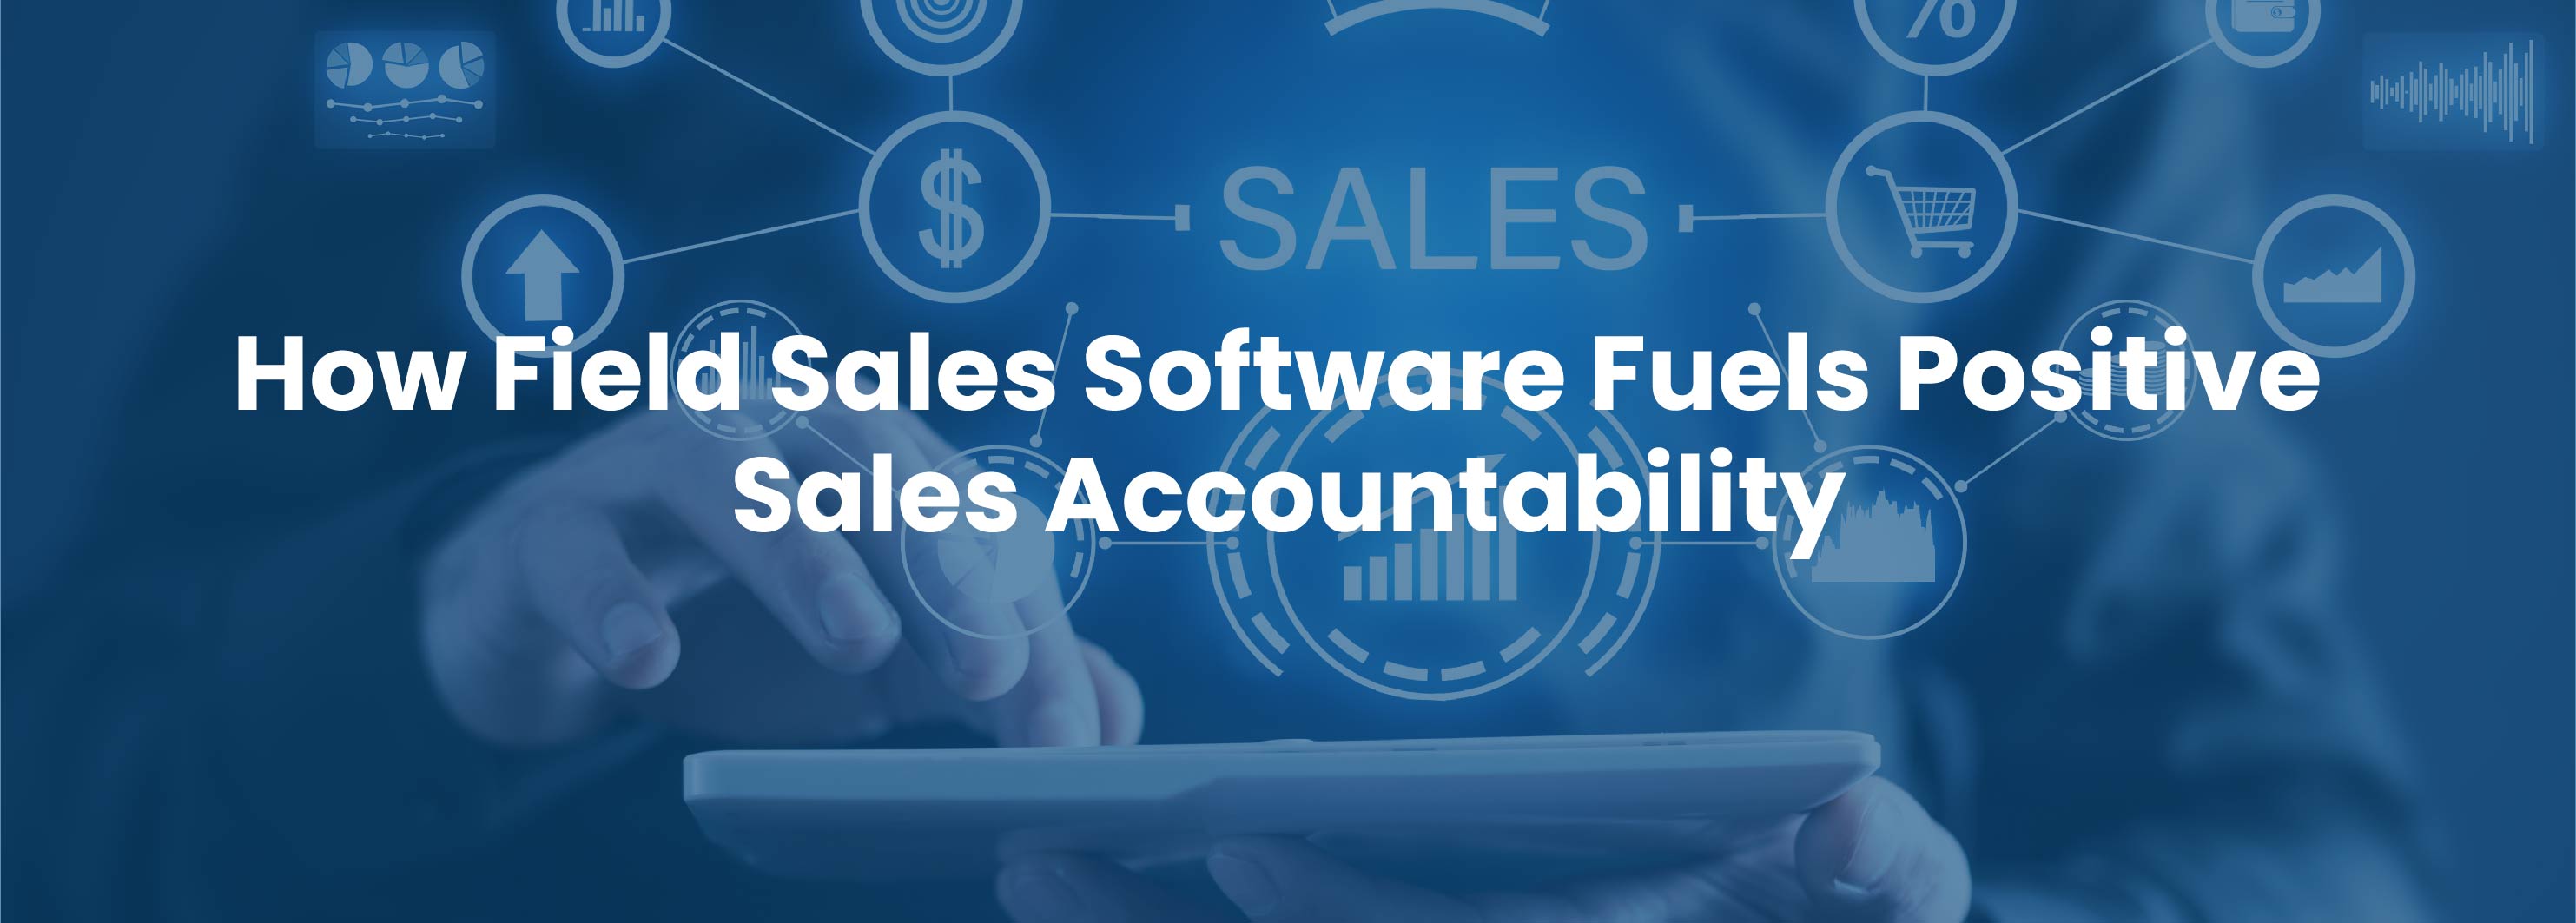 How Field Sales Software Fuels Positive Sales Accountability